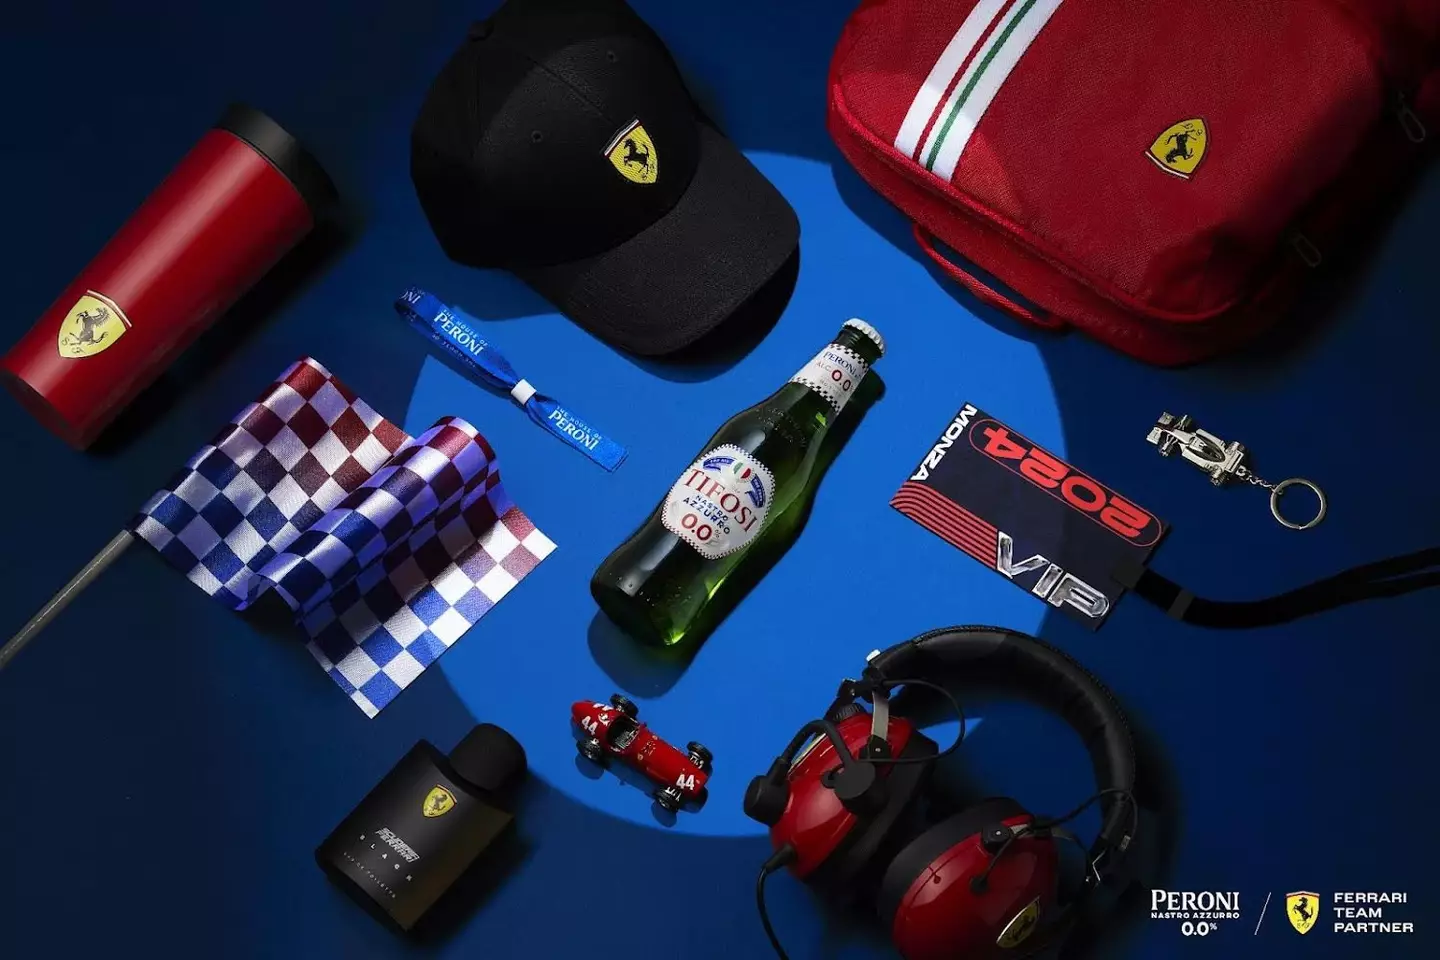 The advert for Peroni and Ferrari.